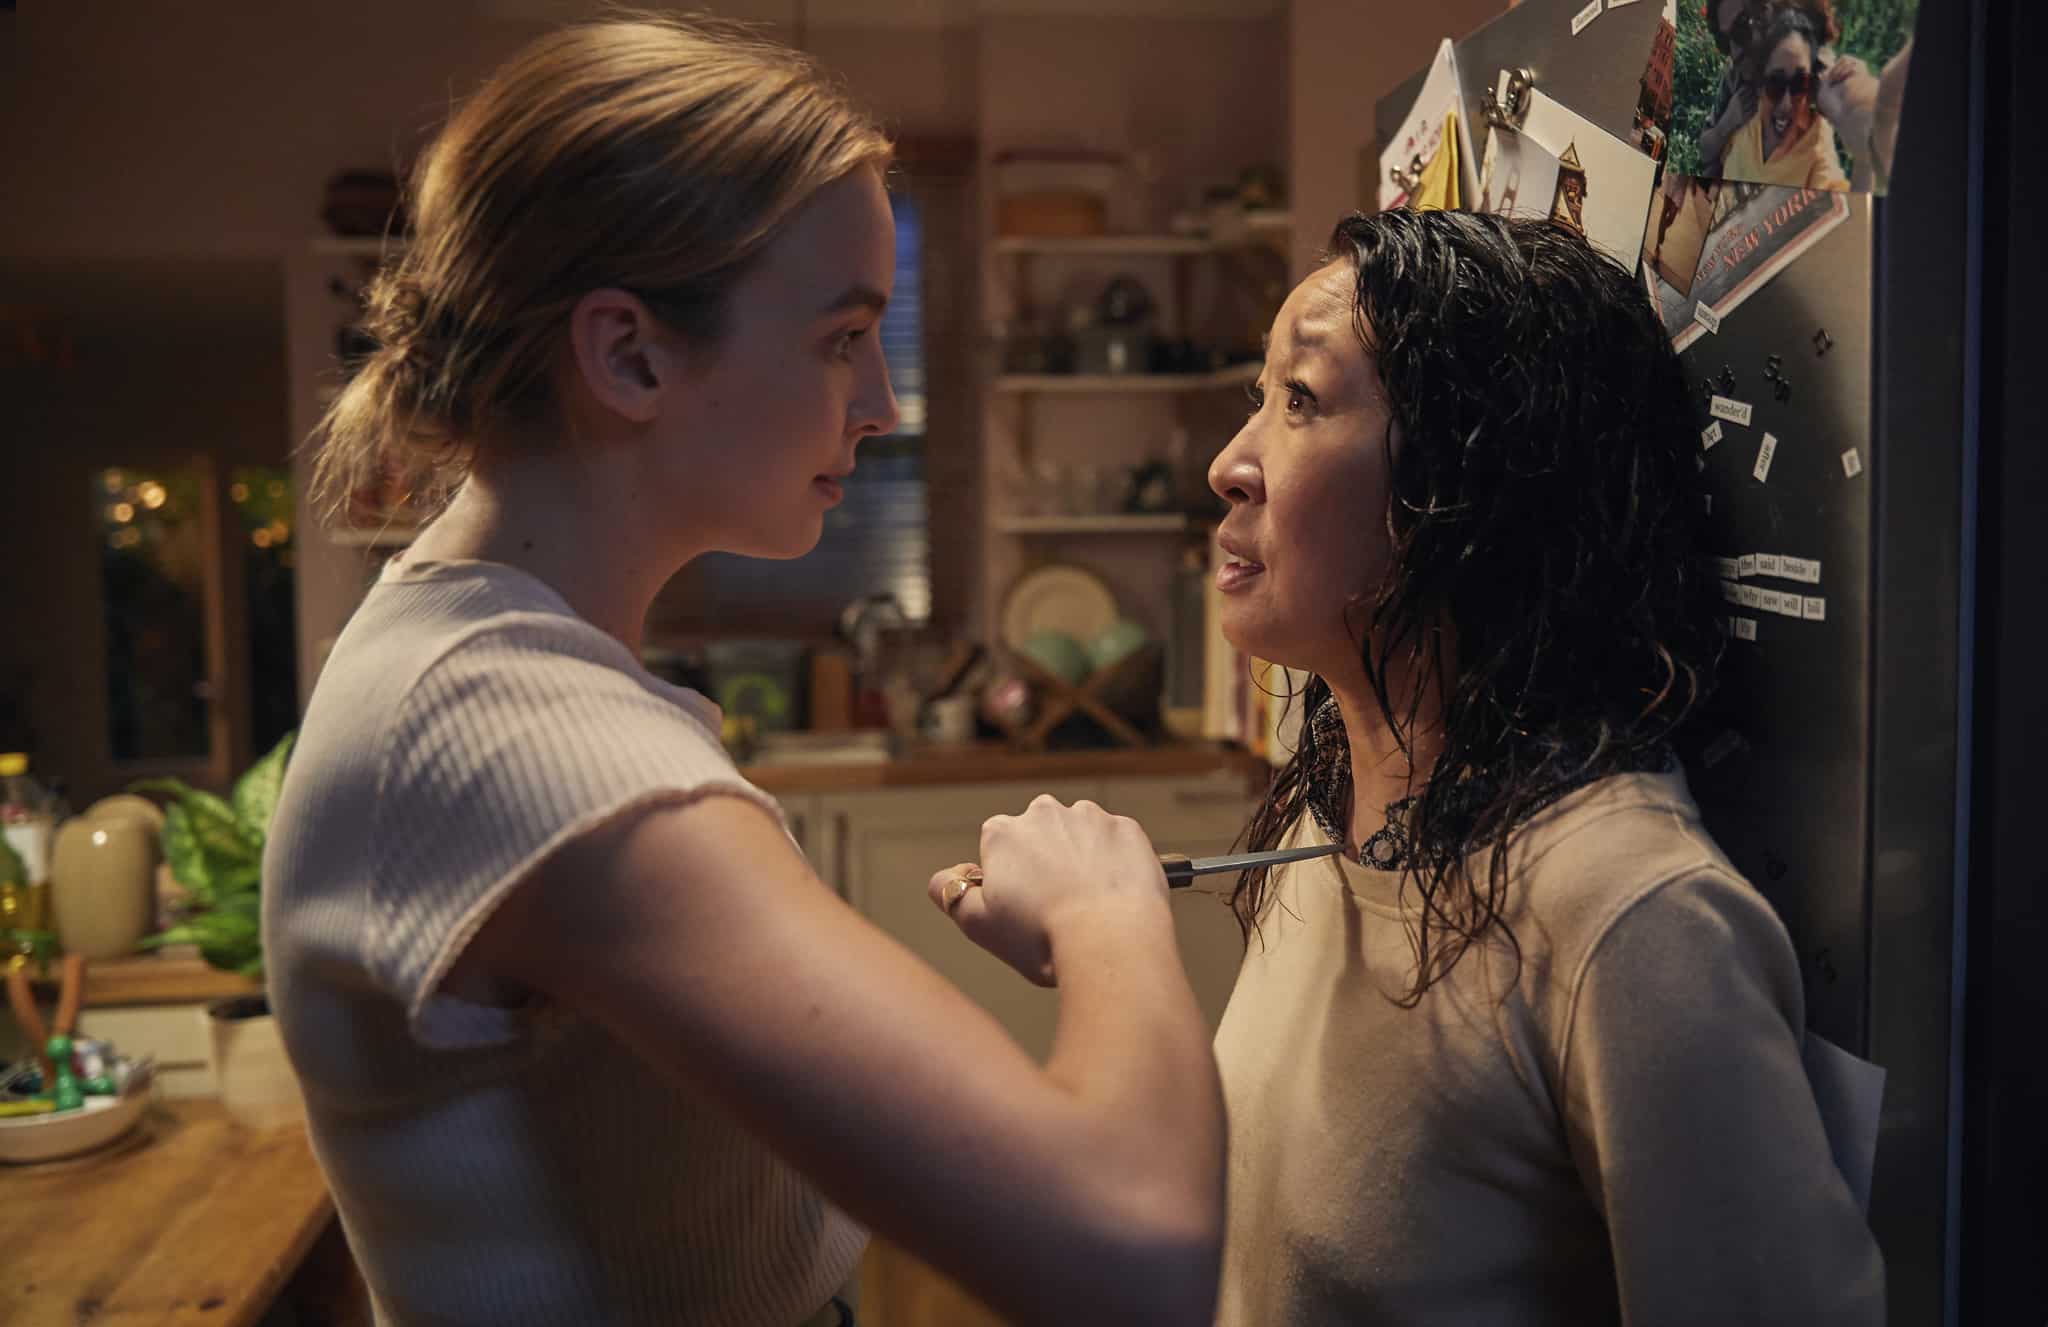 Villanelle holding a knife to Eve’s throat in a kitchen